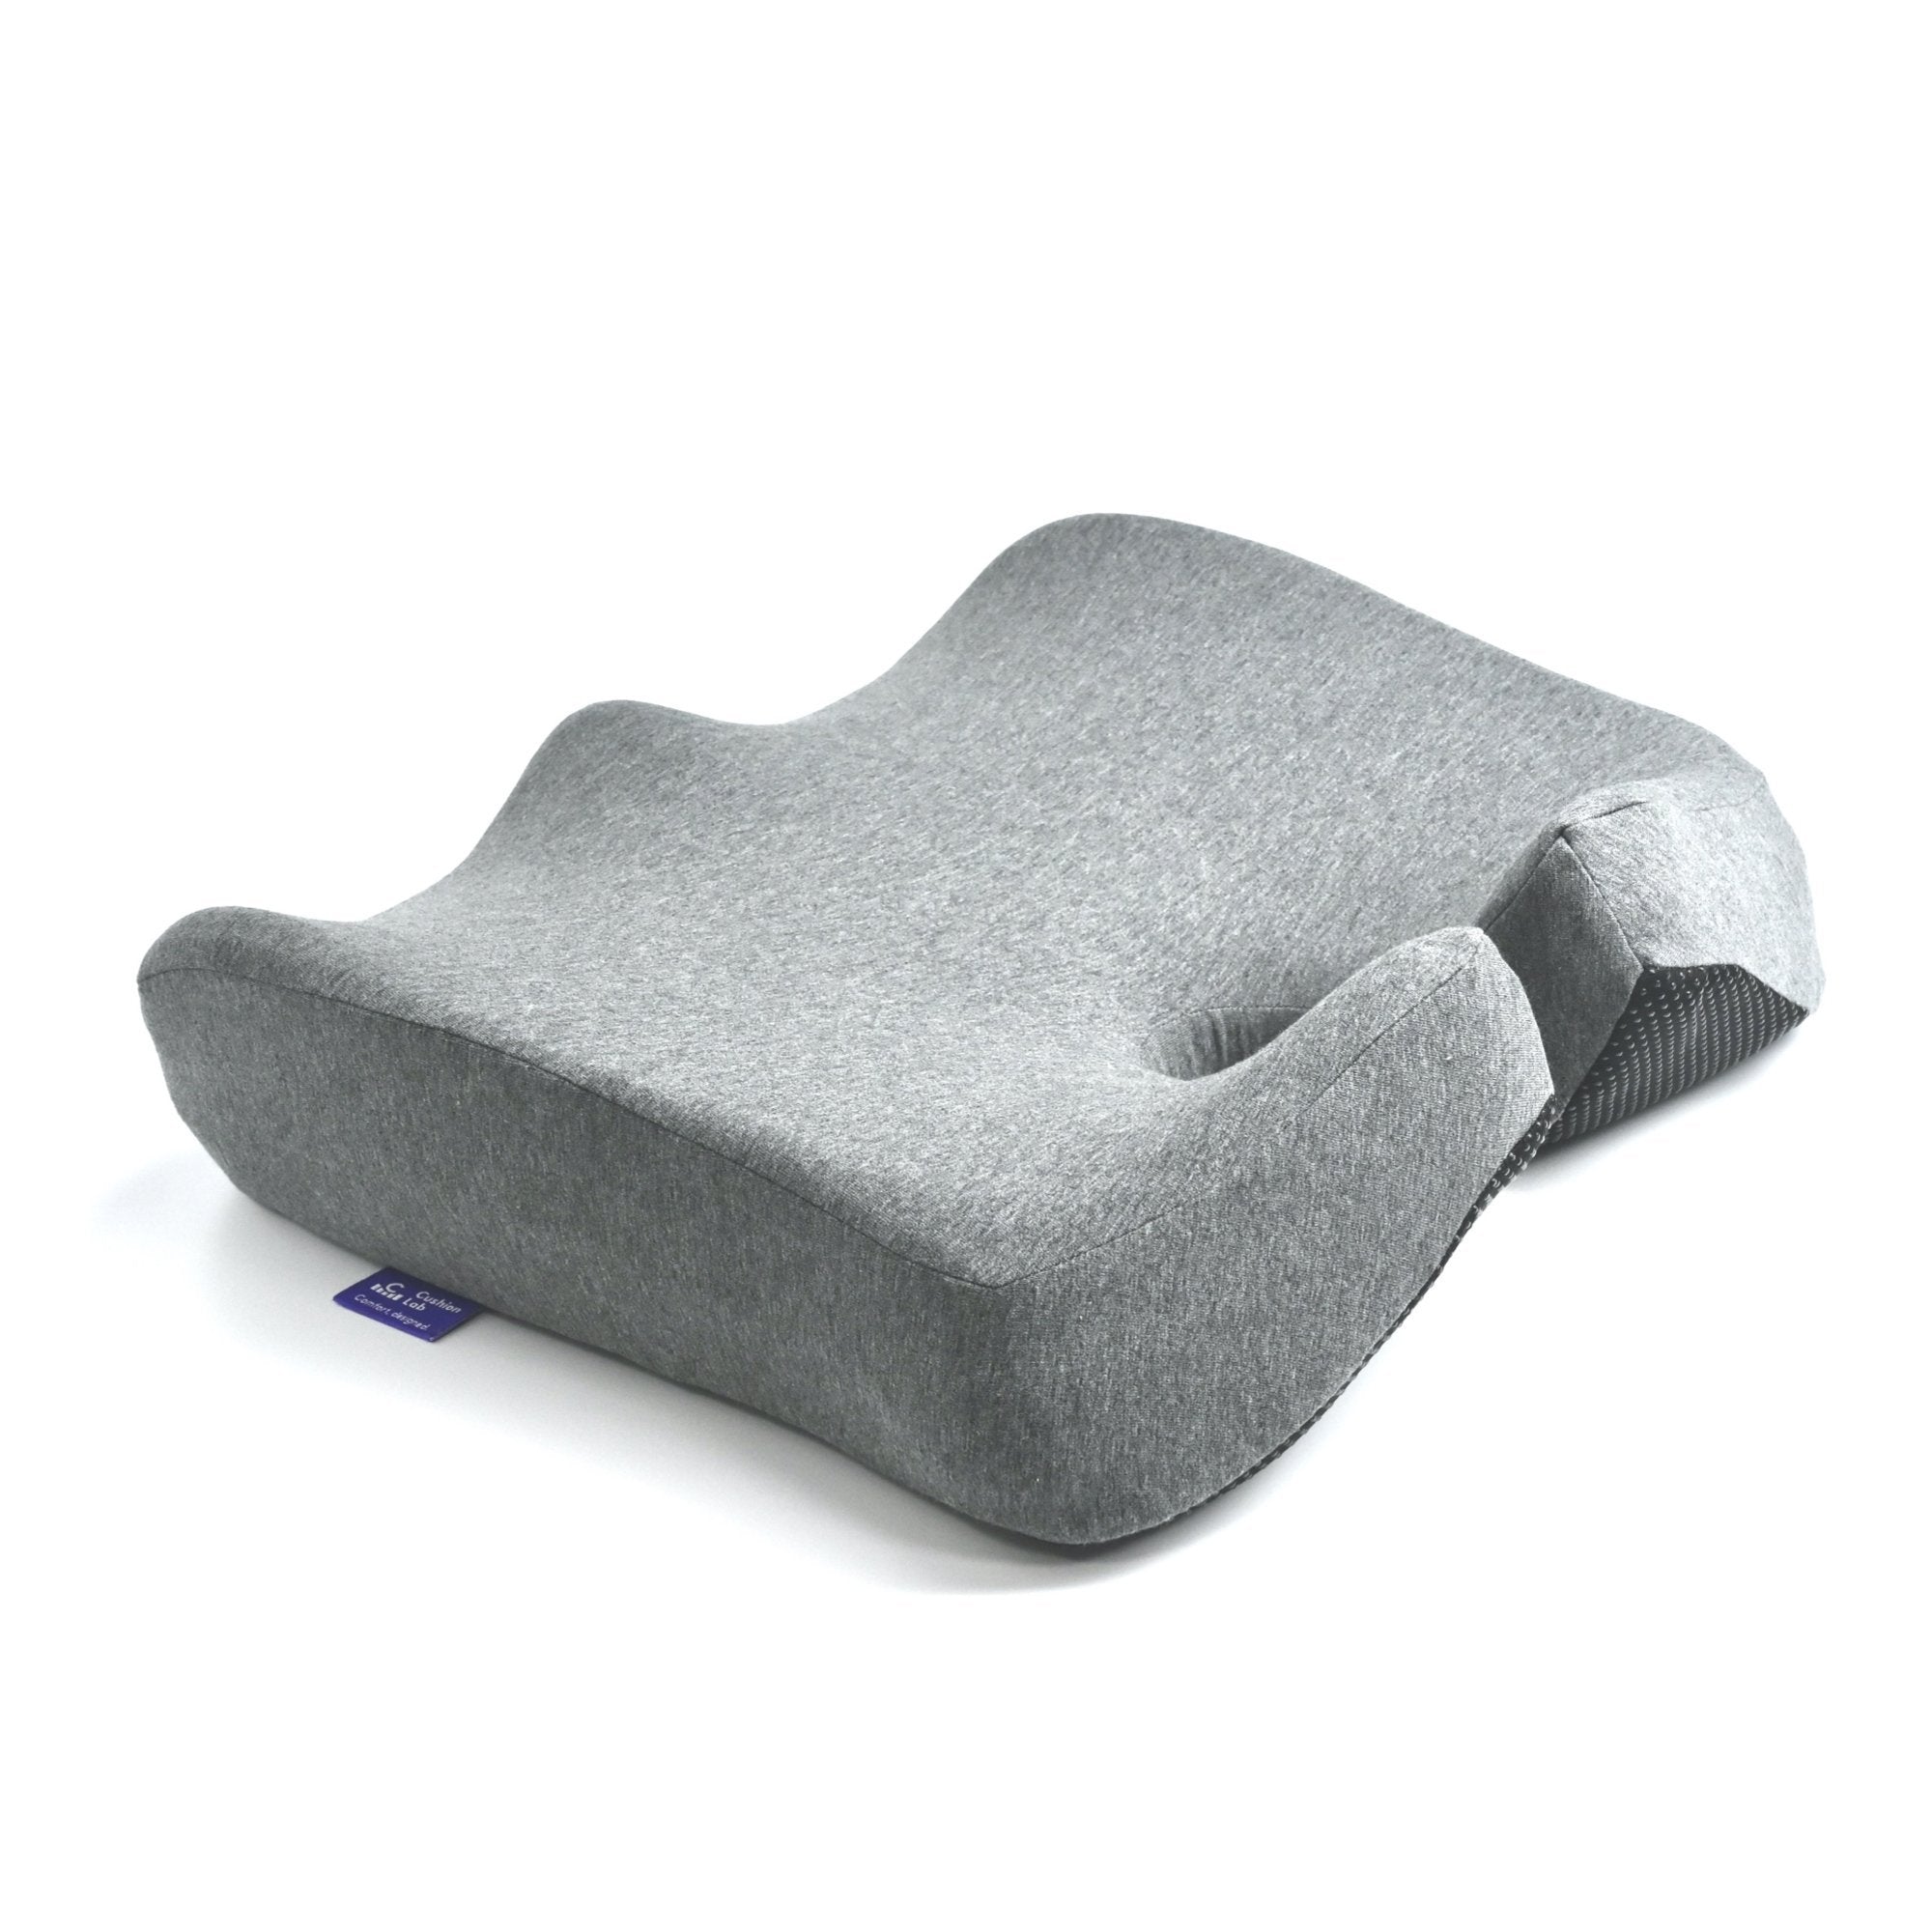 https://cdn.shopify.com/s/files/1/0046/4994/3153/products/pressure-relief-seat-cushion-631306_2000x.jpg?v=1604830417